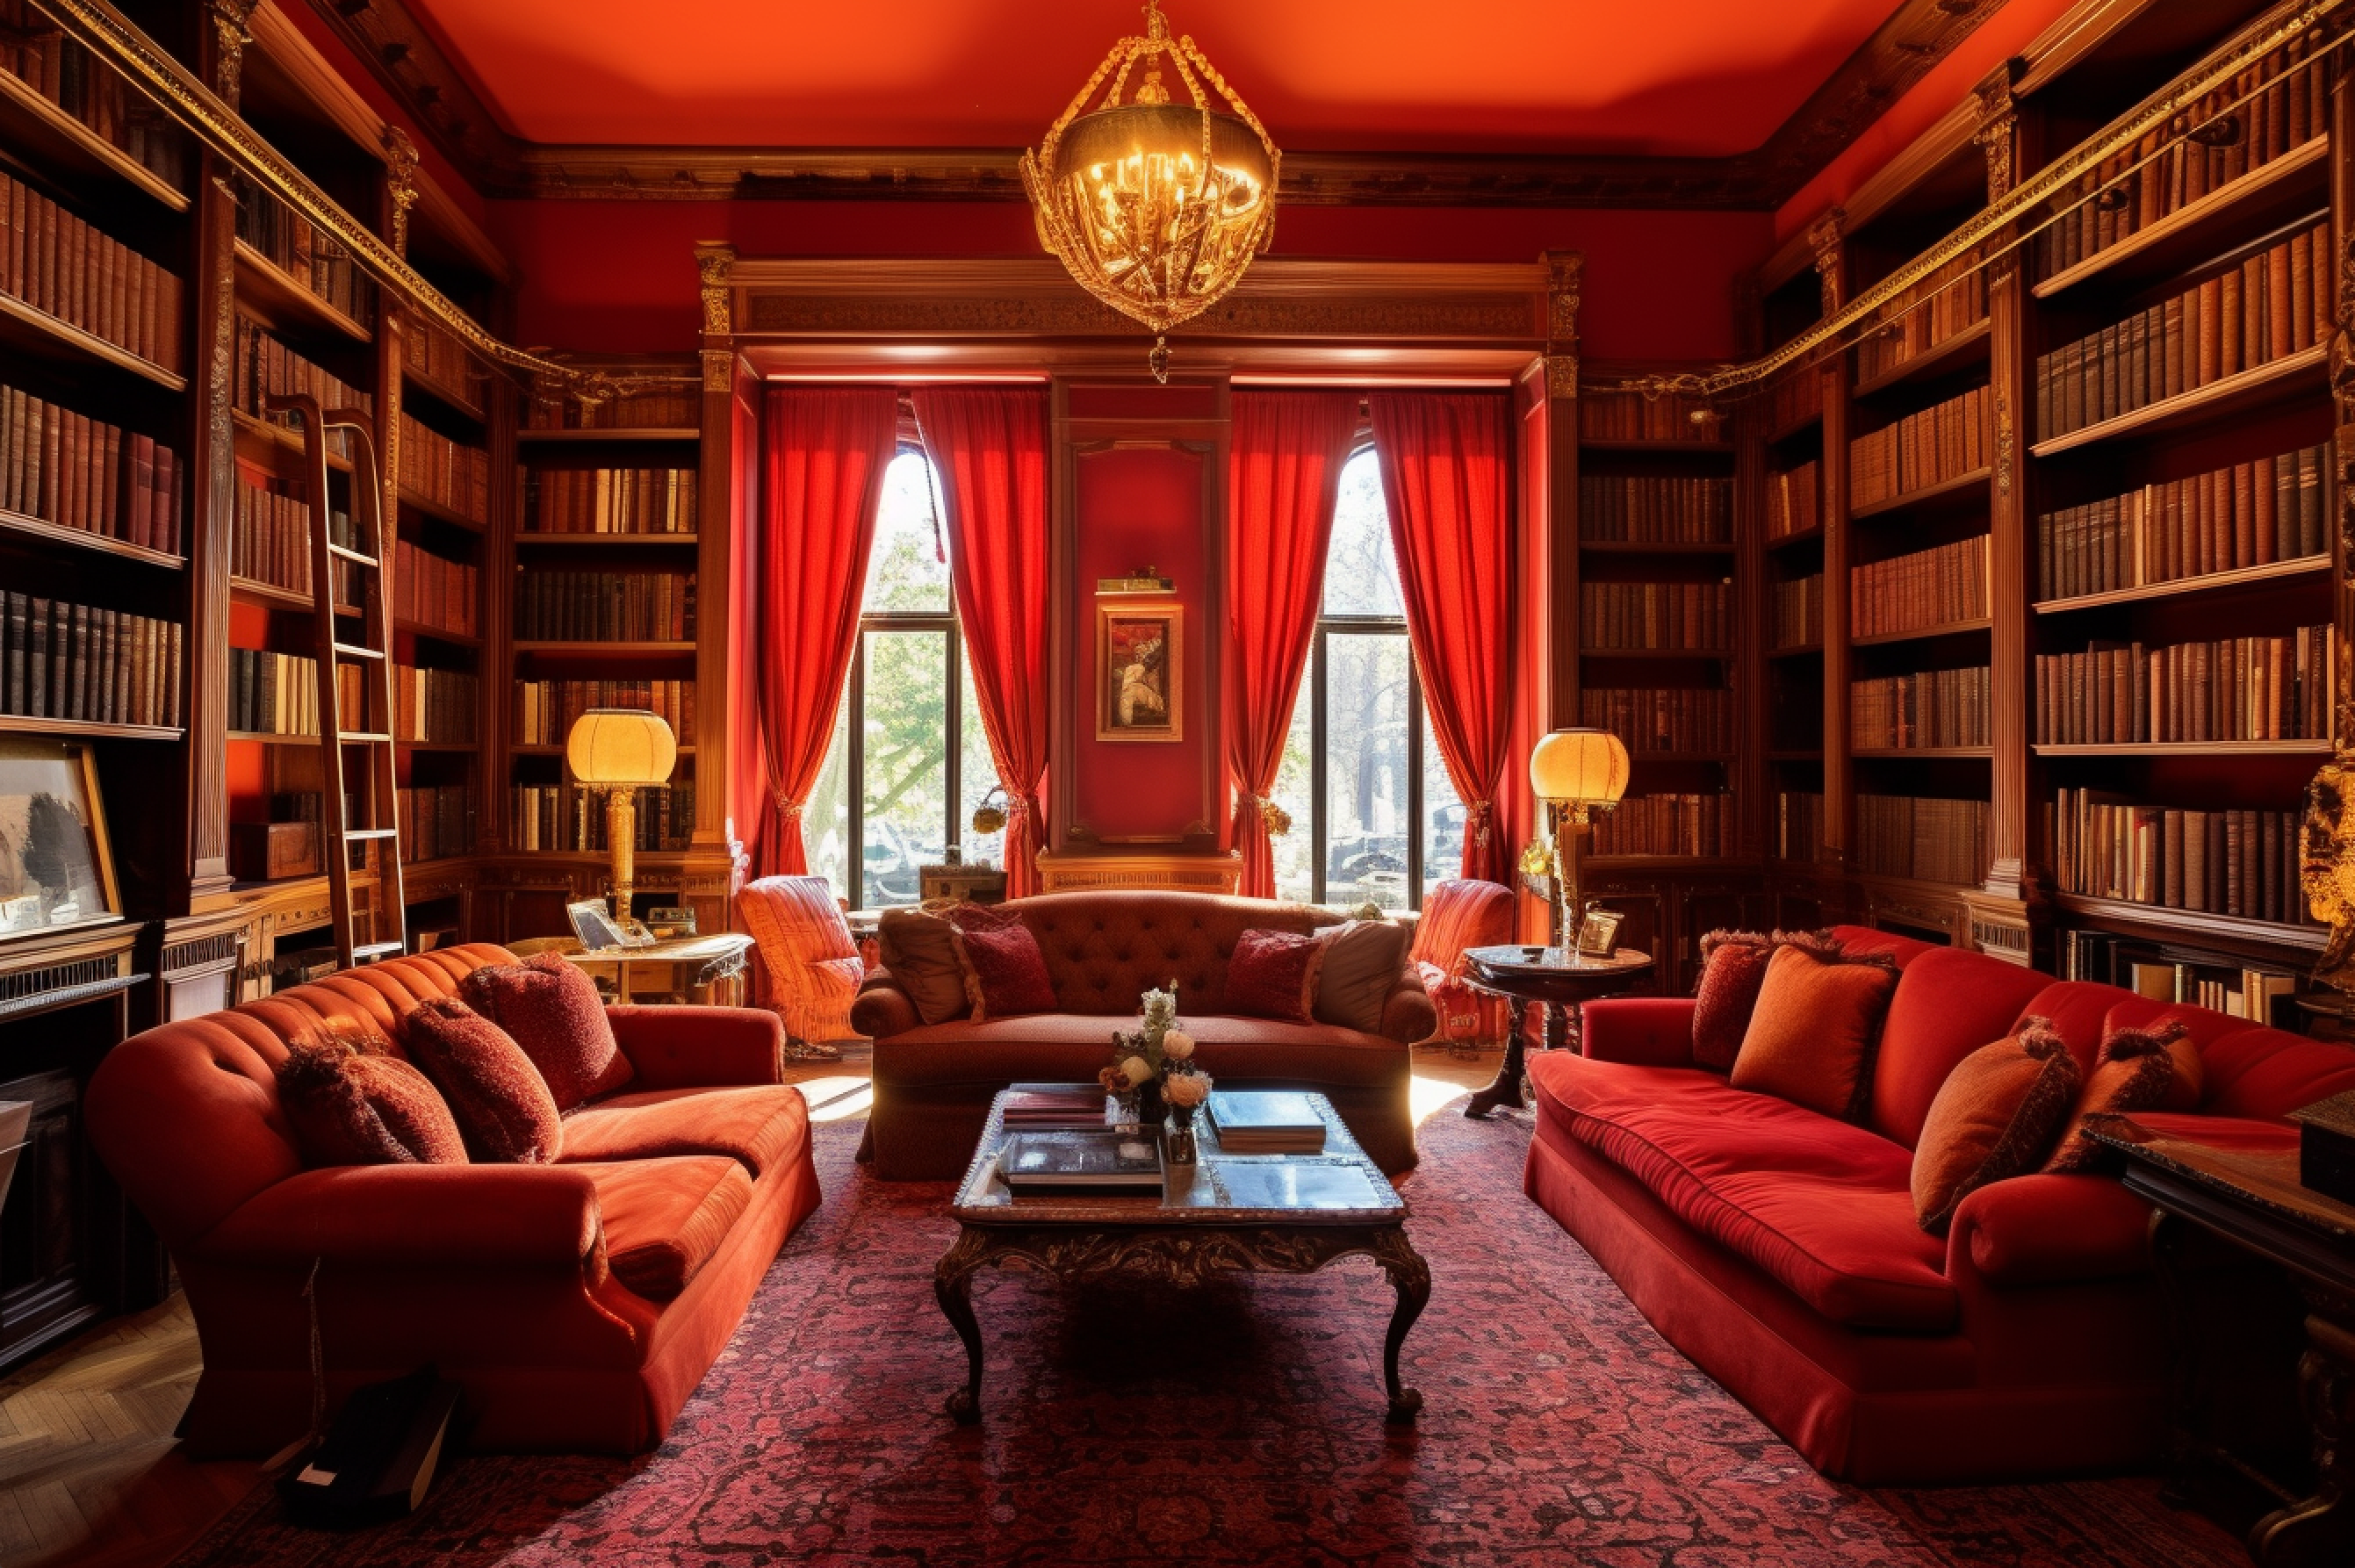 18. Red and Gold Color Scheme - Classic Library